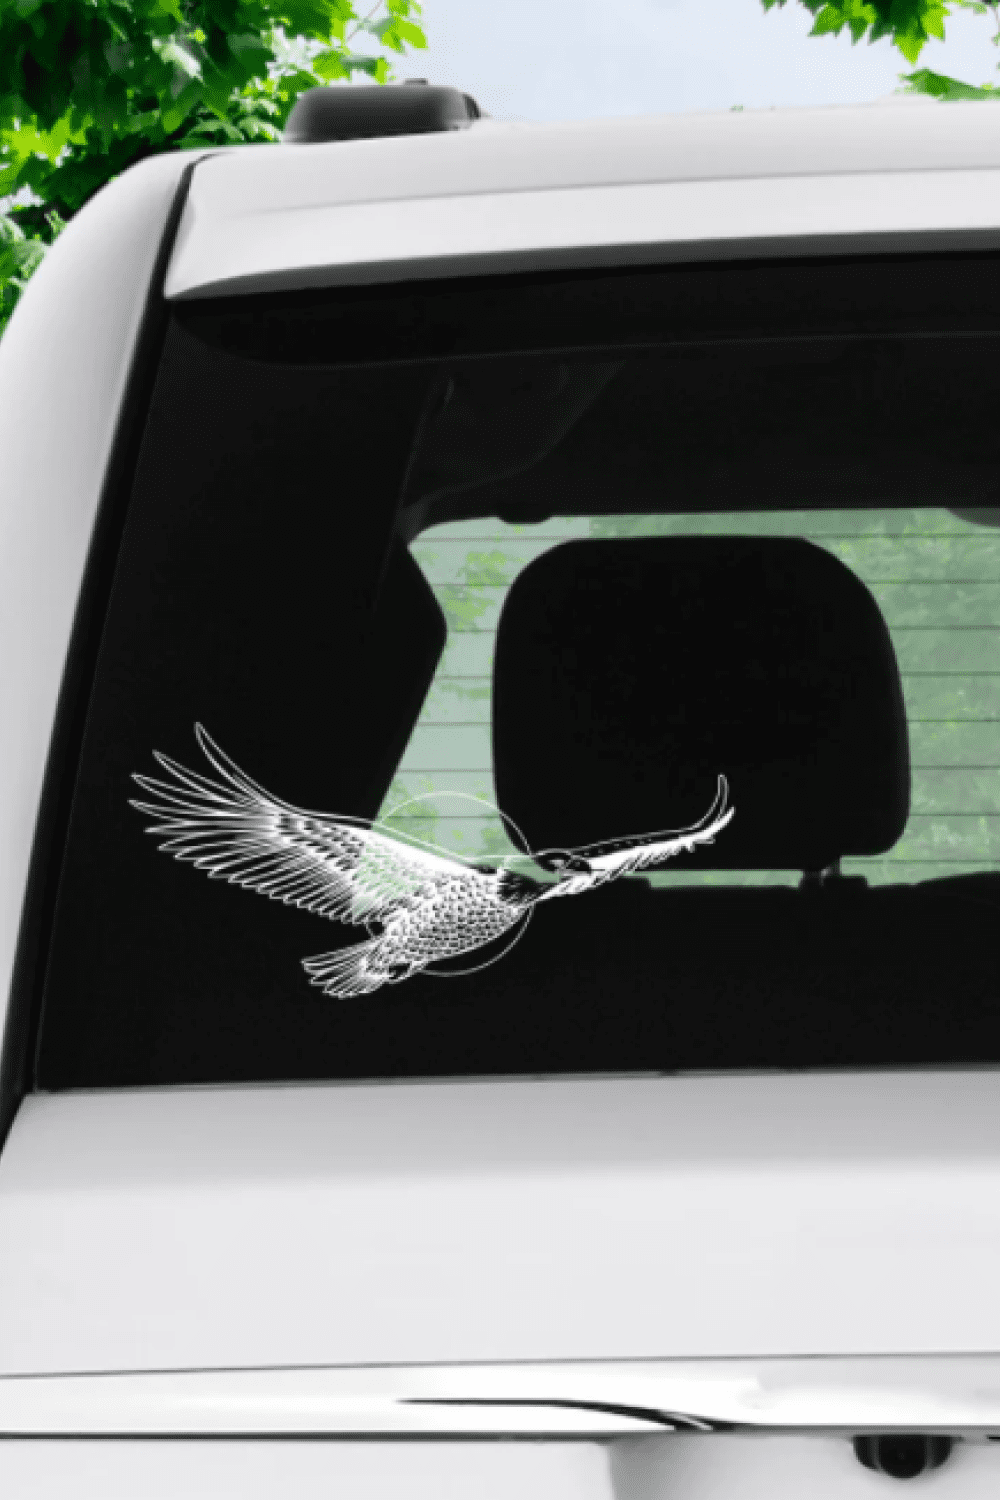 Eagle With Moon SVG - Eagle On The Rear Glass Of Car.